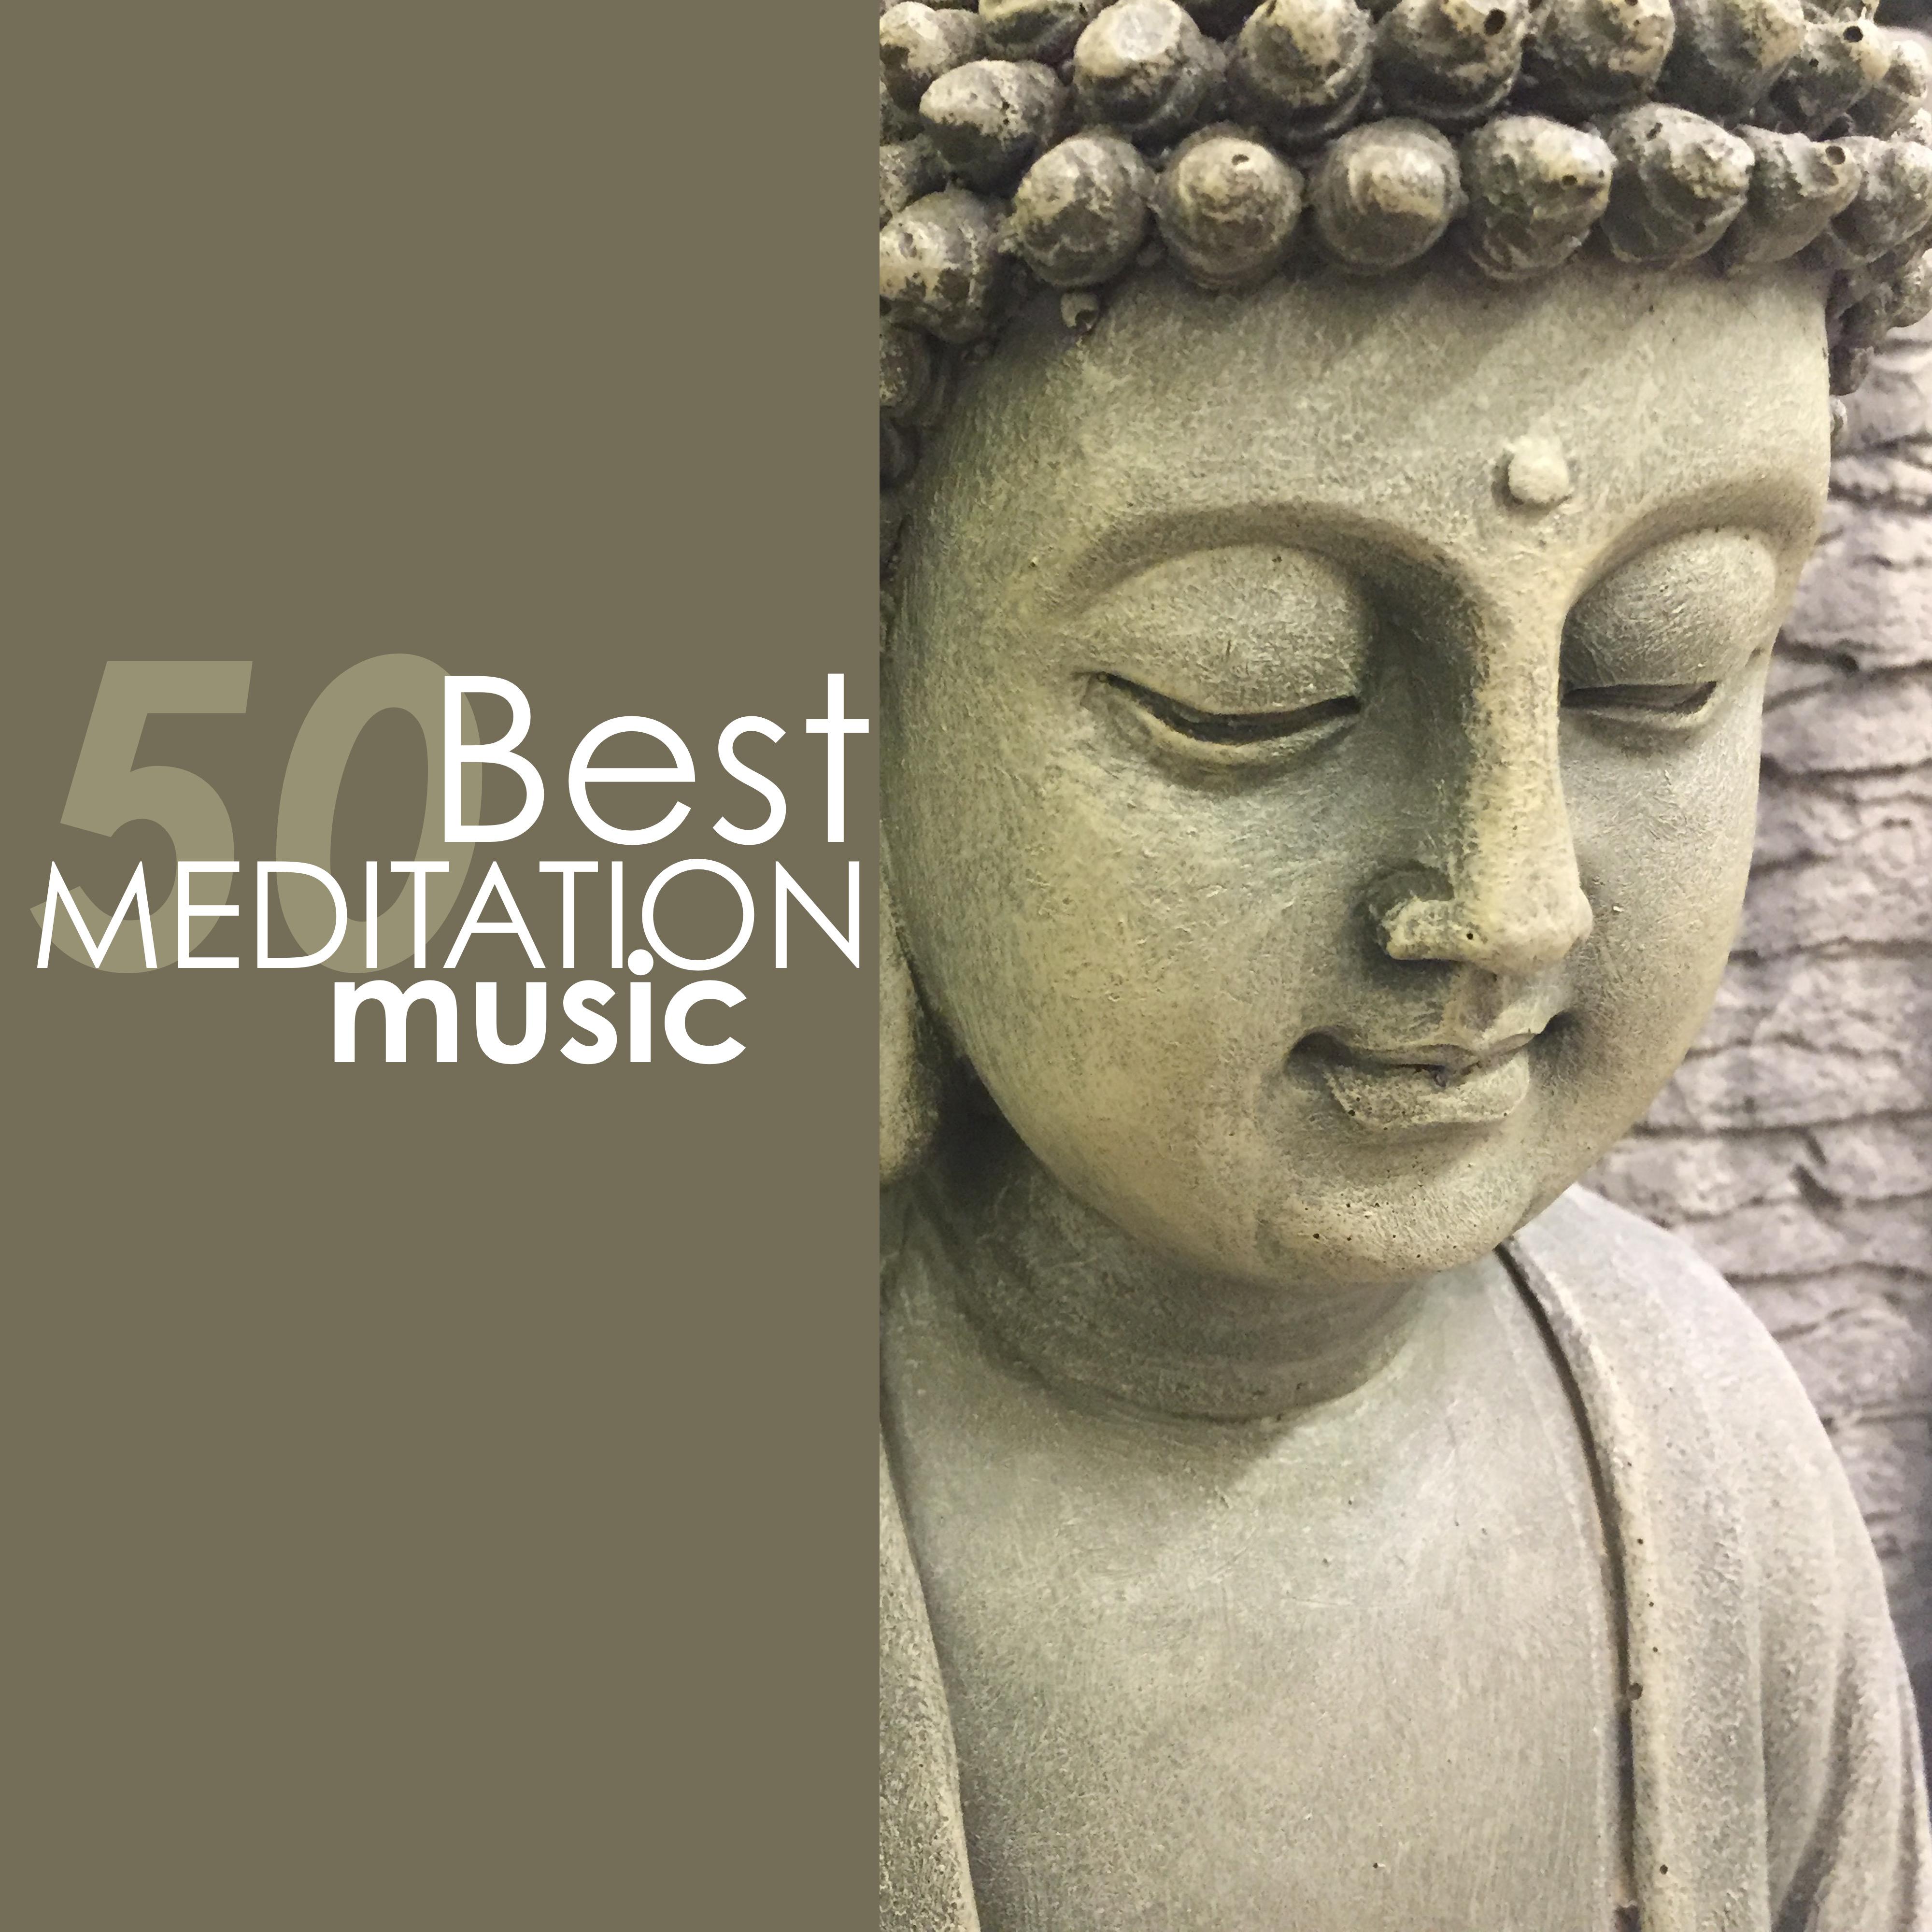 50 Best Meditation Music - Kundalini Meditation Music for Mindfulness Meditation Techniques, Inner Peace and Contemplation